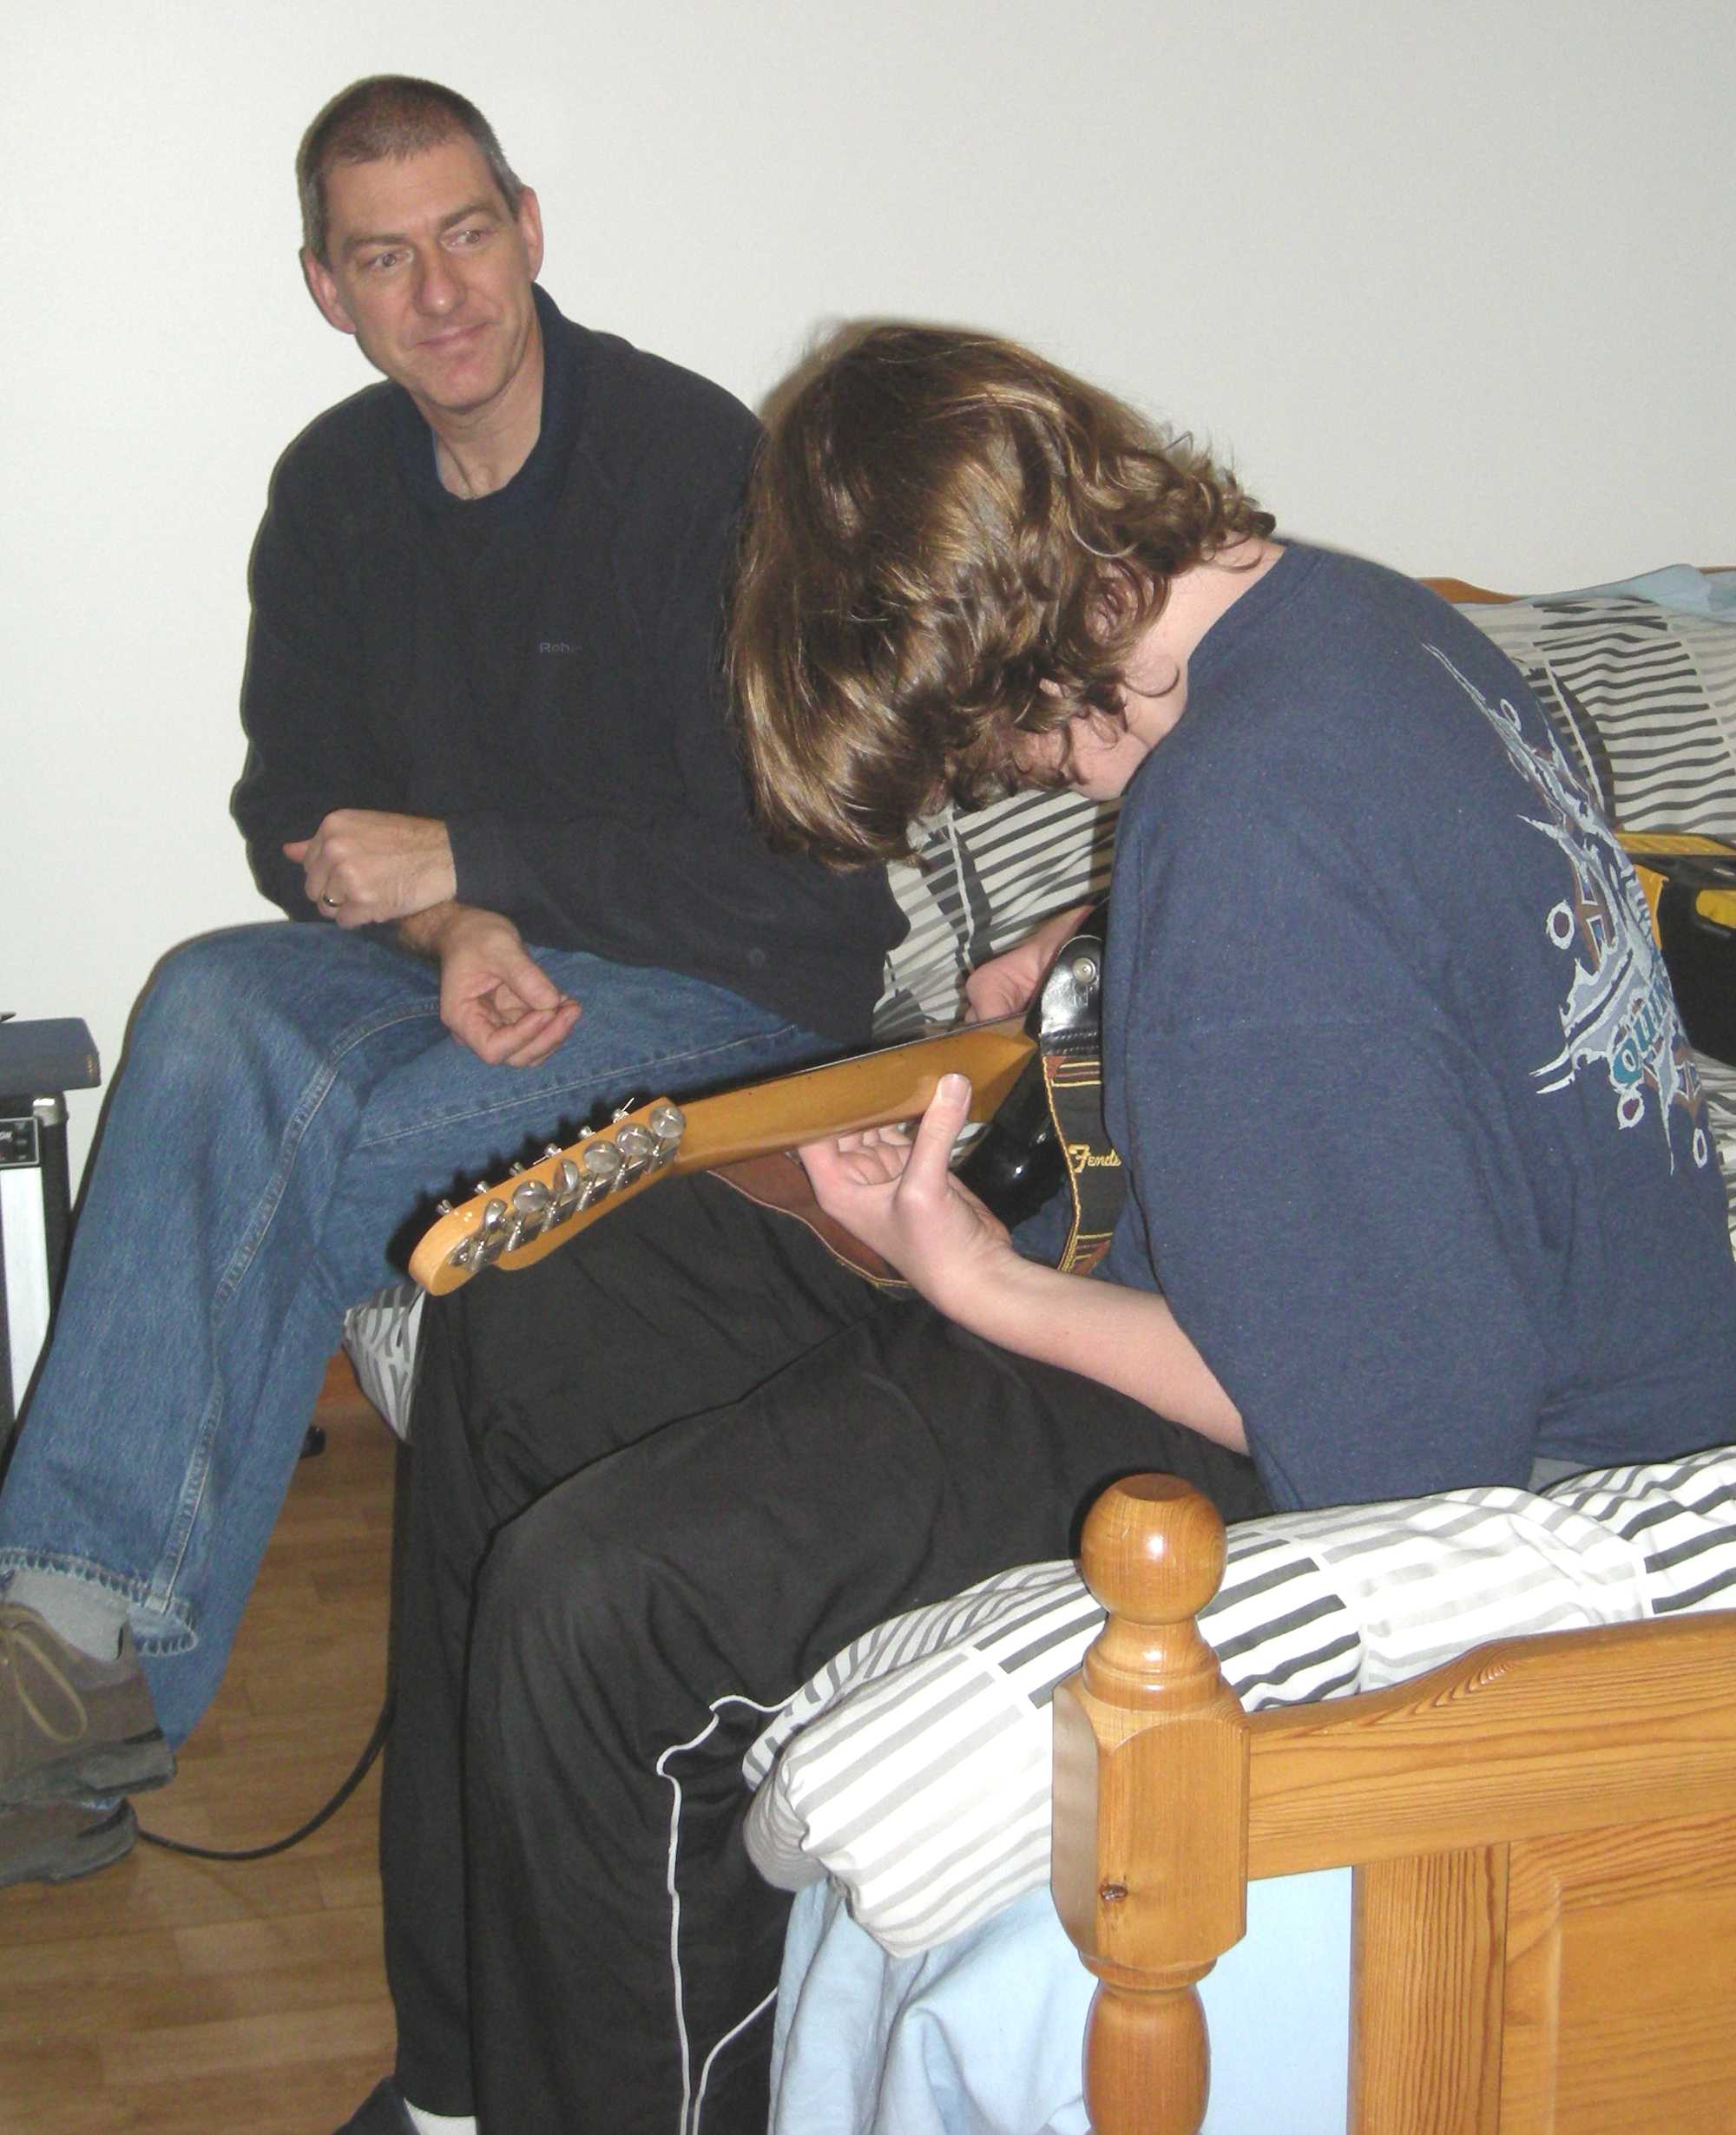 Ben with his birthday present an electric guitar